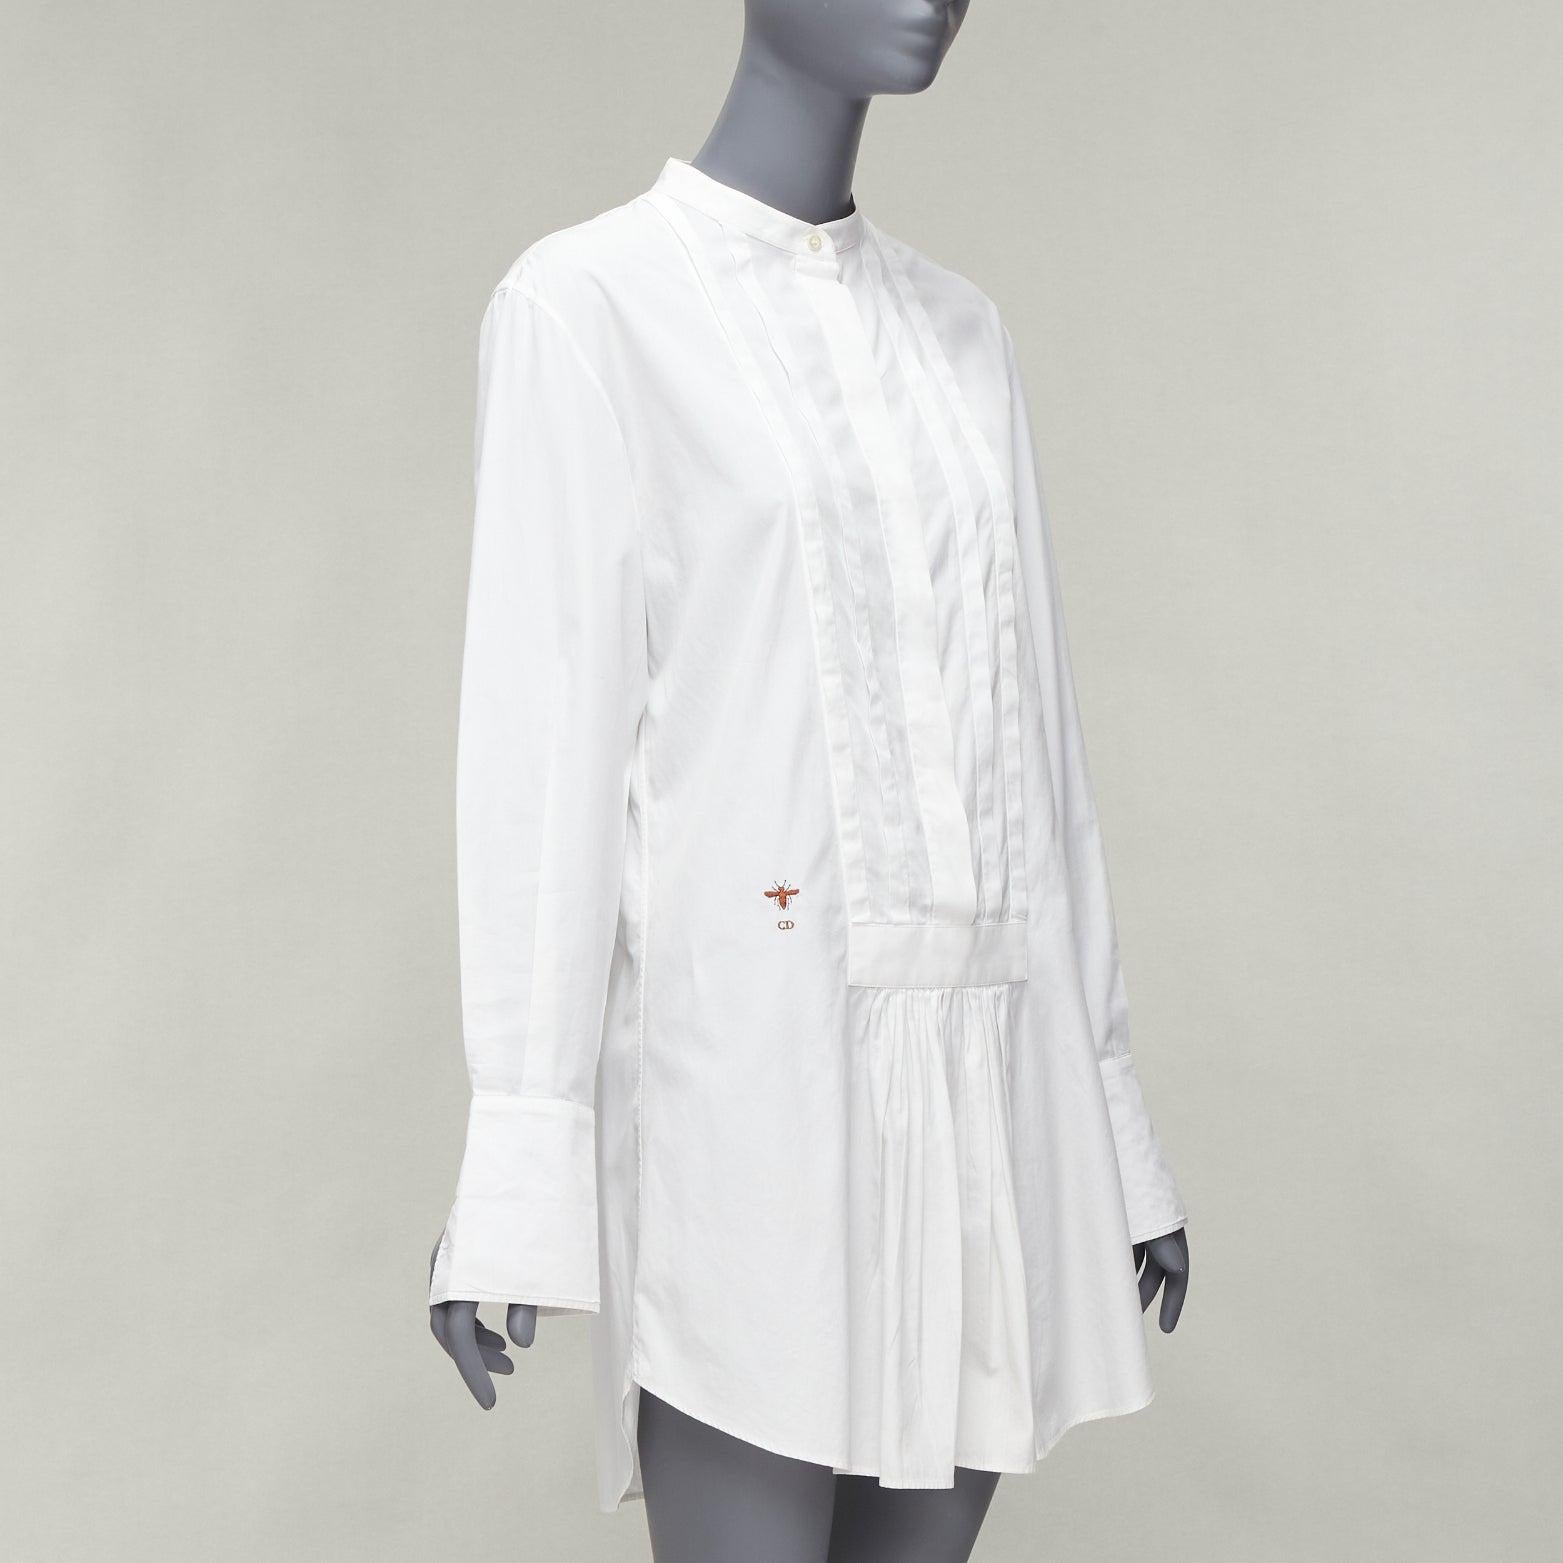 CHRISTIAN DIOR brown CD logo bee white cotton pleat shirt dress FR36 S
Reference: NKLL/A00226
Brand: Christian Dior
Designer: Maria Grazia Chiuri
Material: Cotton
Color: White, Brown
Pattern: Solid
Closure: Button
Extra Details: back yoke with